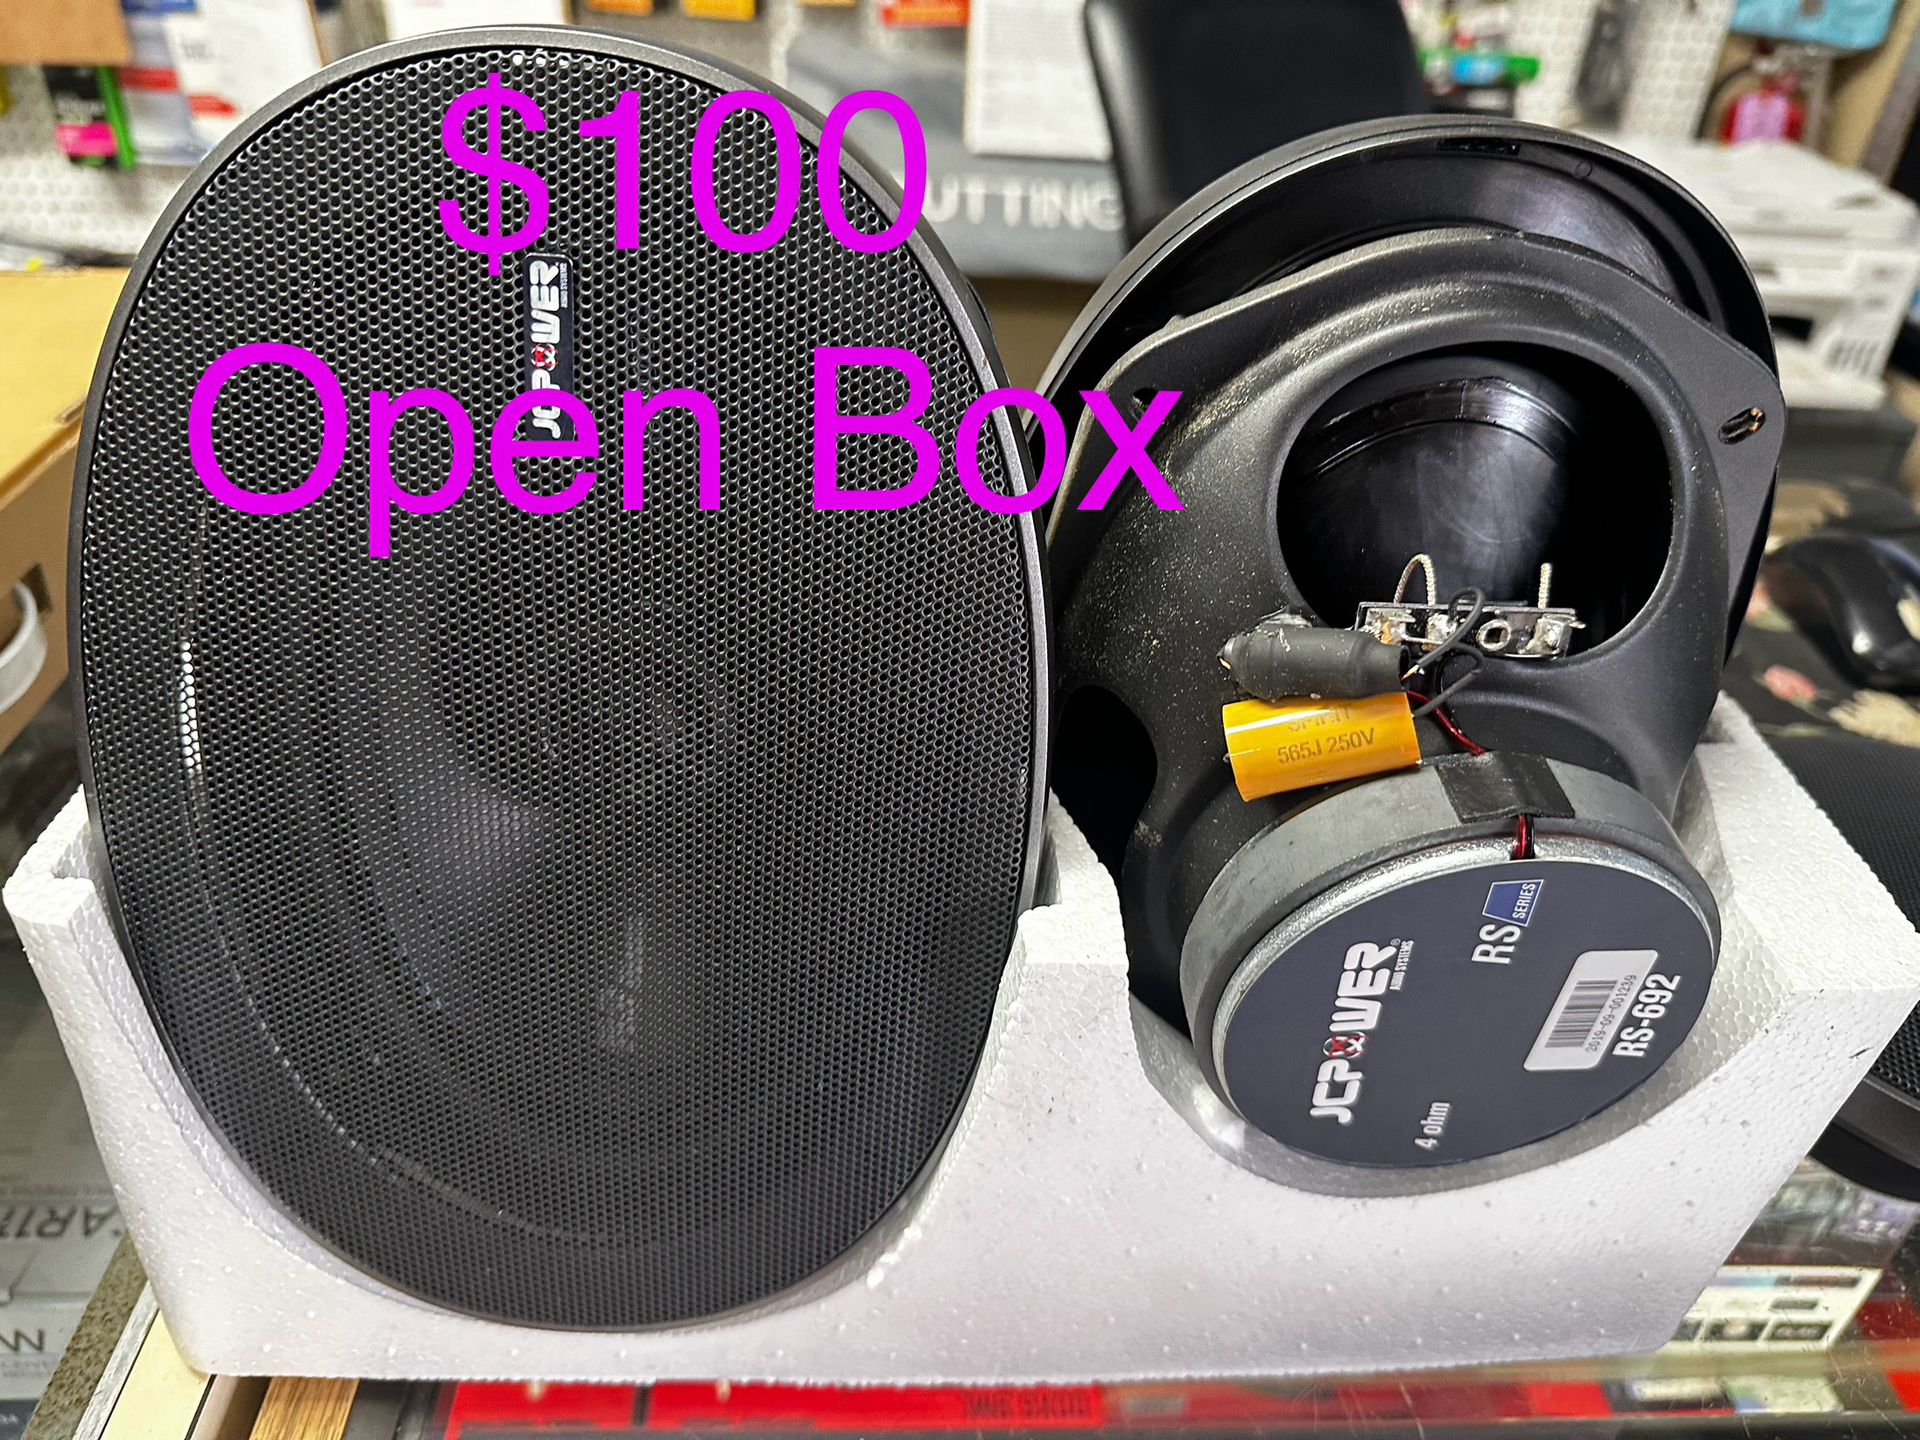 Open Box Items For sale 